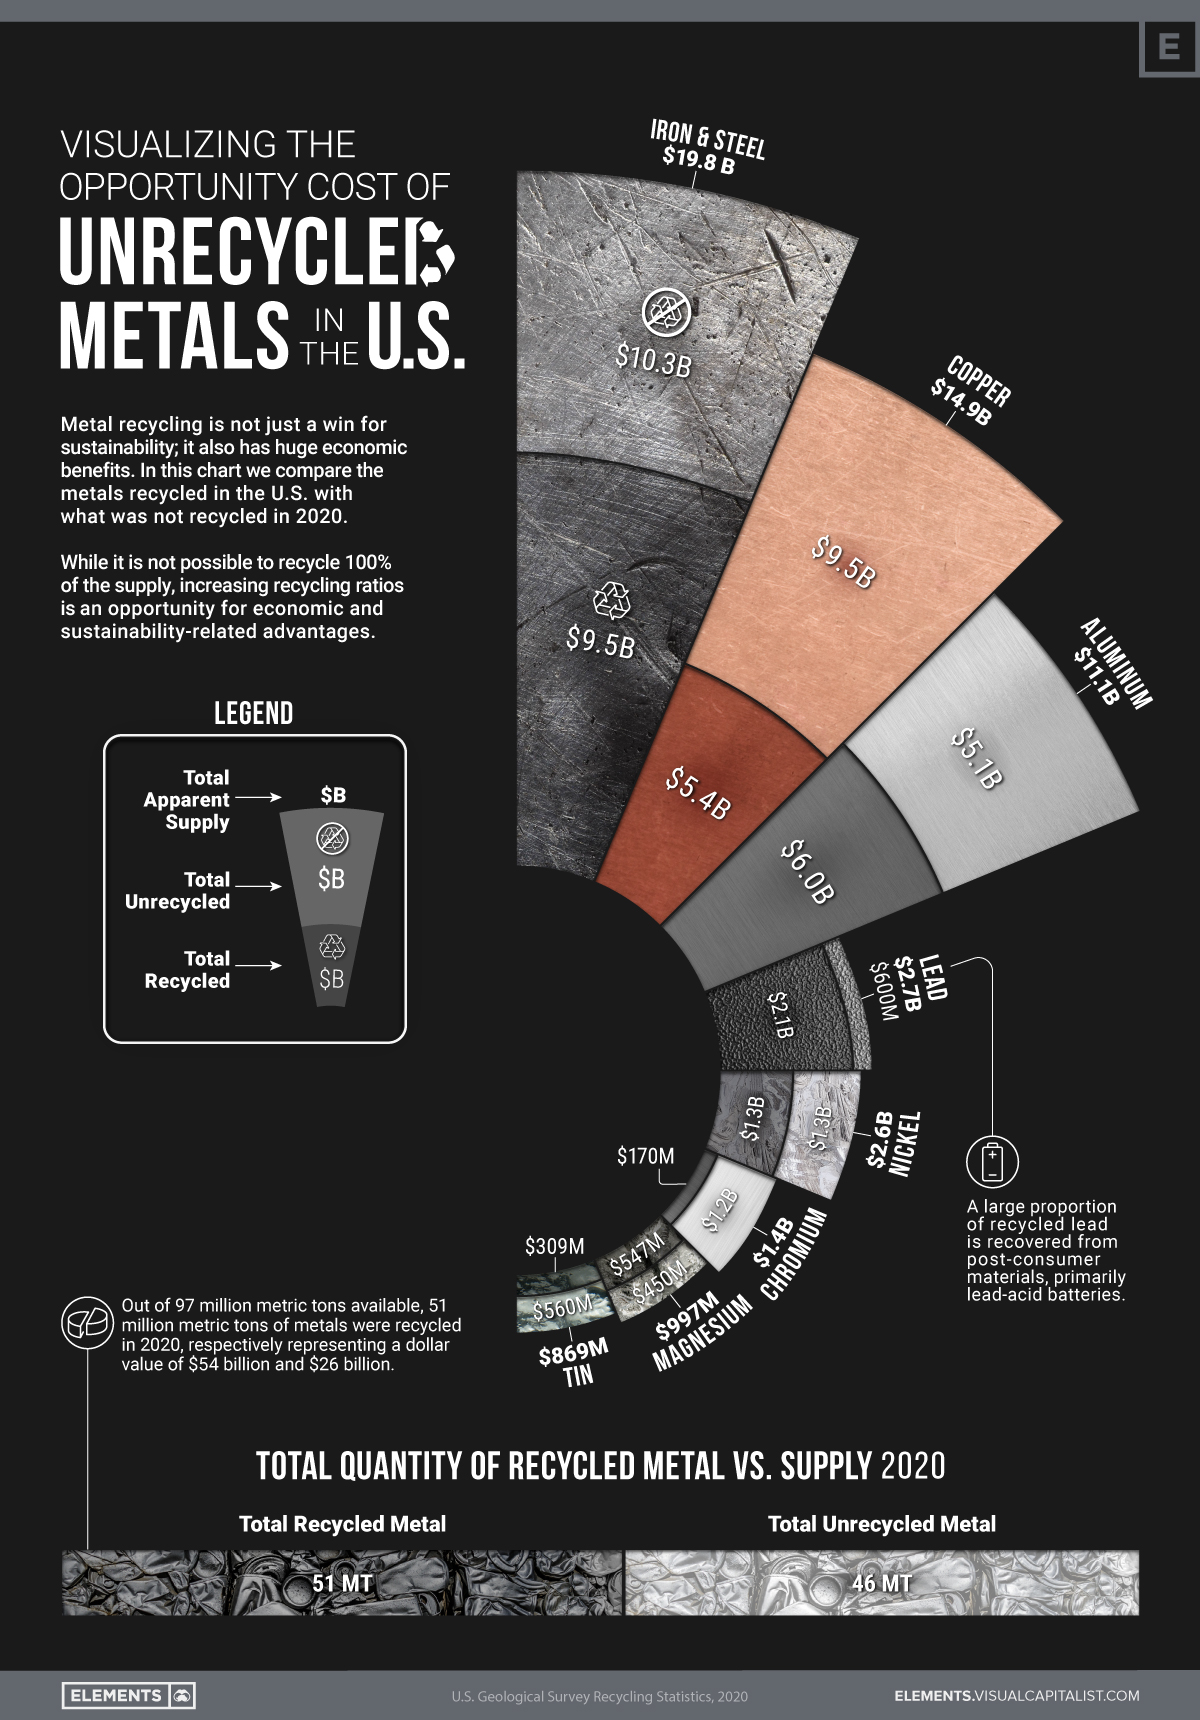 Visualizing the Opportunity Cost of Unrecycled Metals in the U.S.